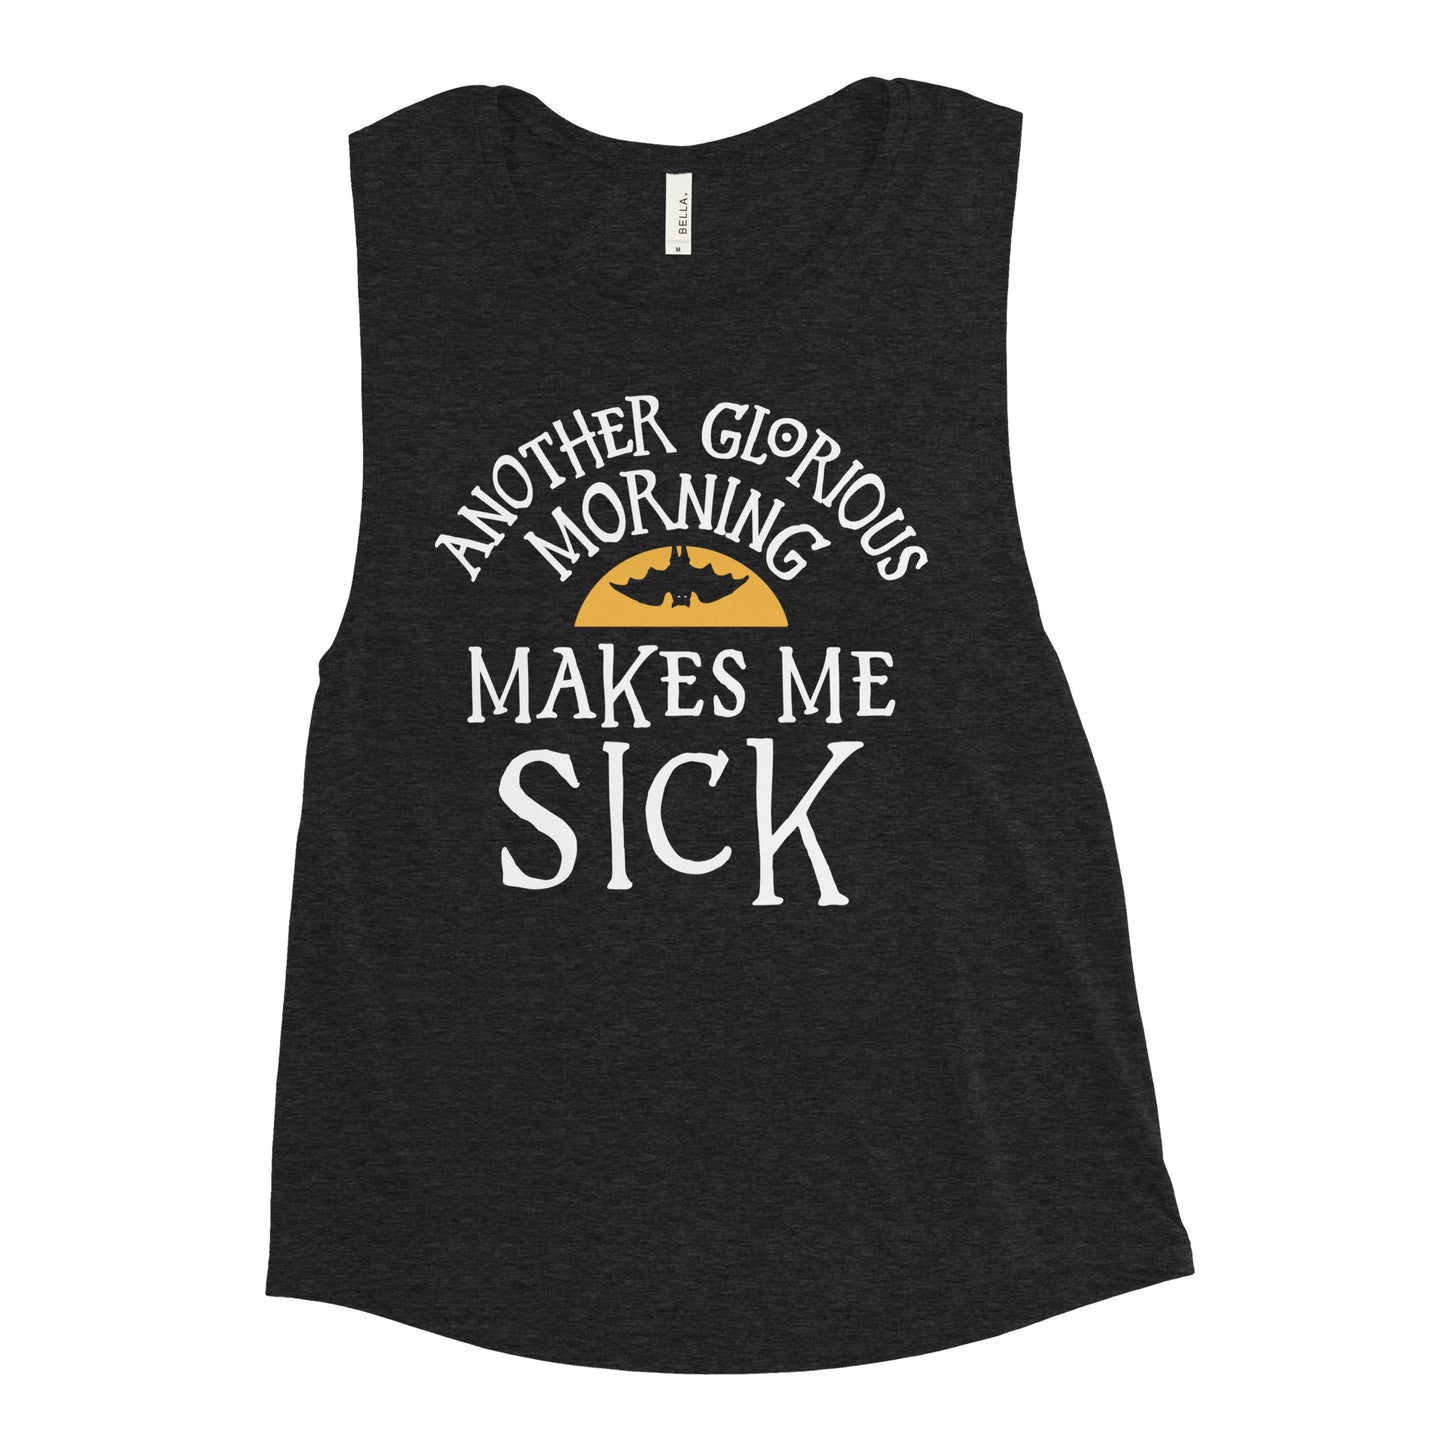 Another Glorious Morning Women's Muscle Tank